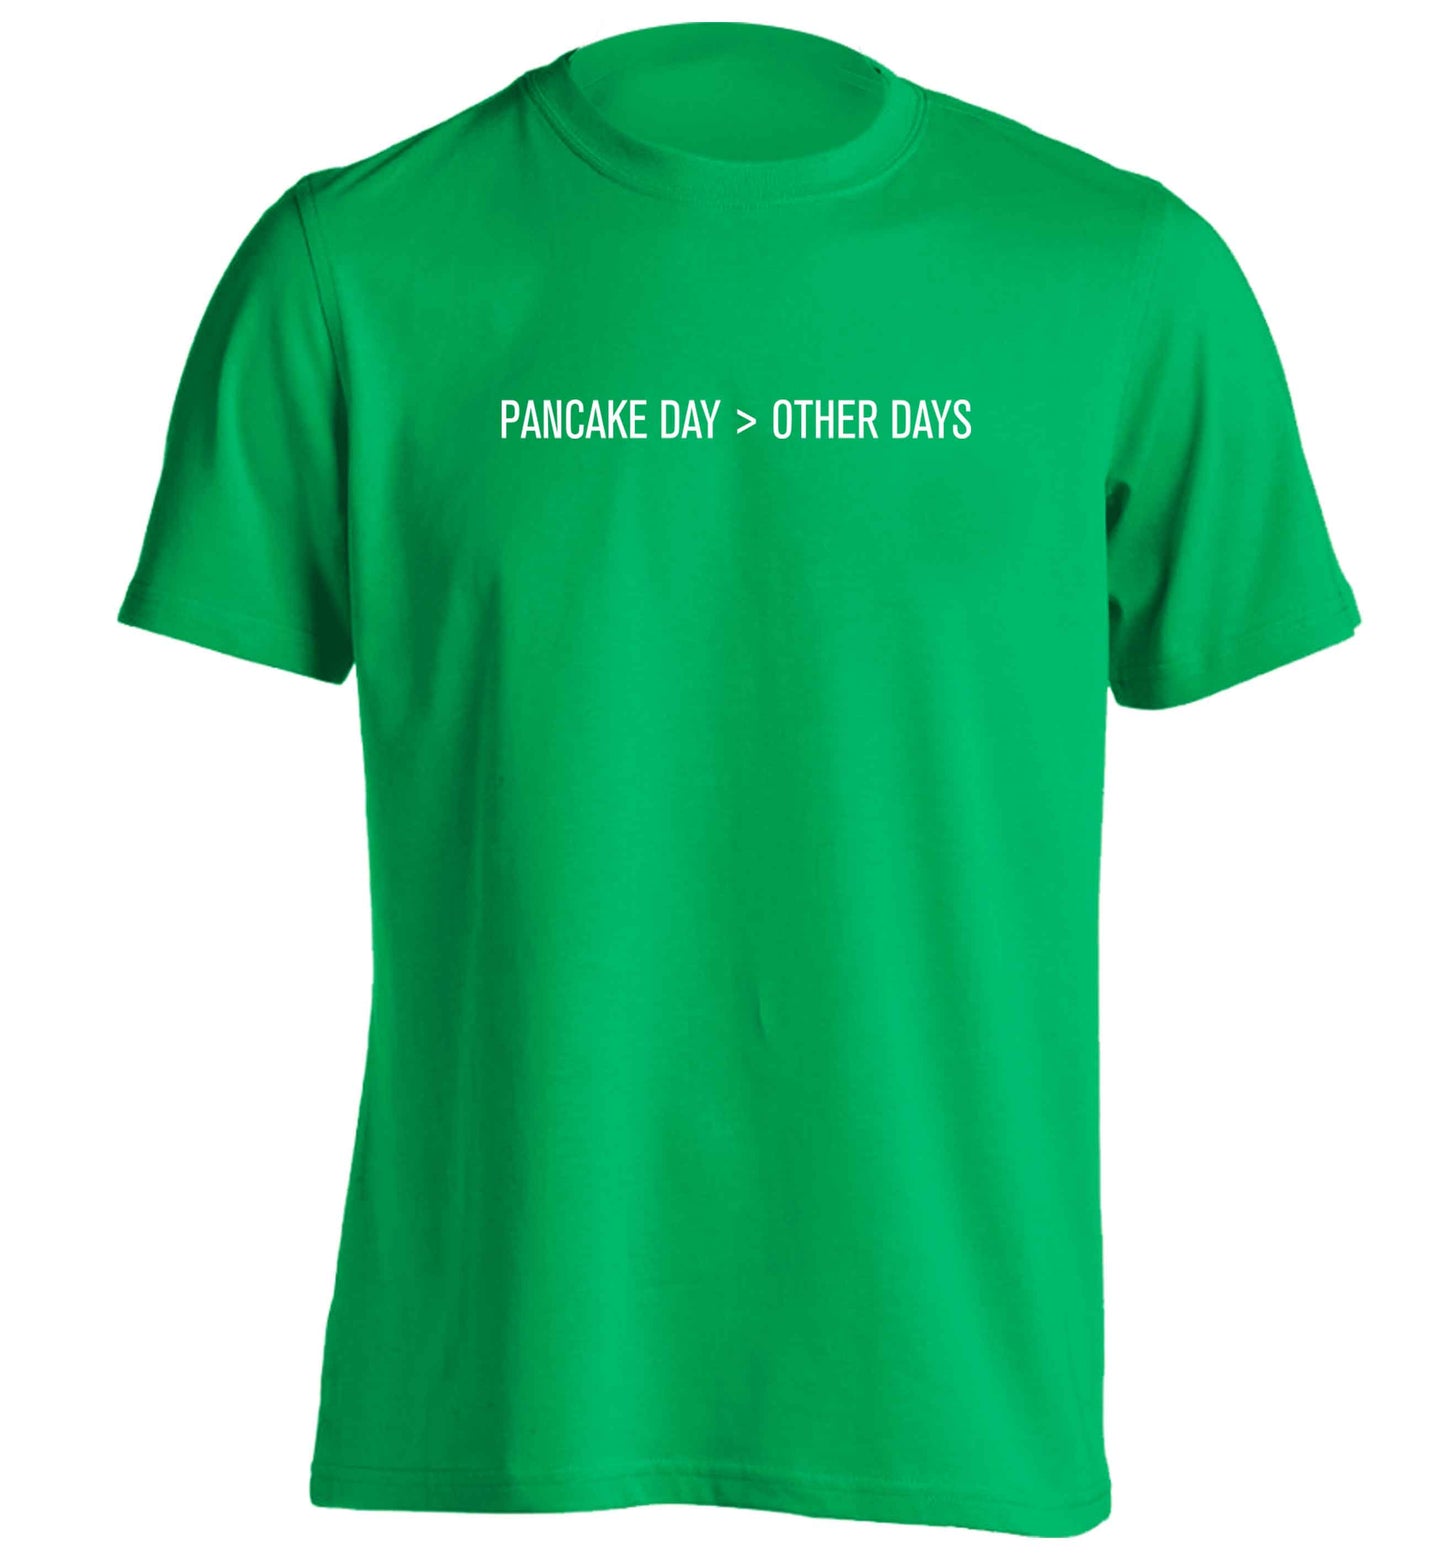 Pancake day > other days adults unisex green Tshirt 2XL